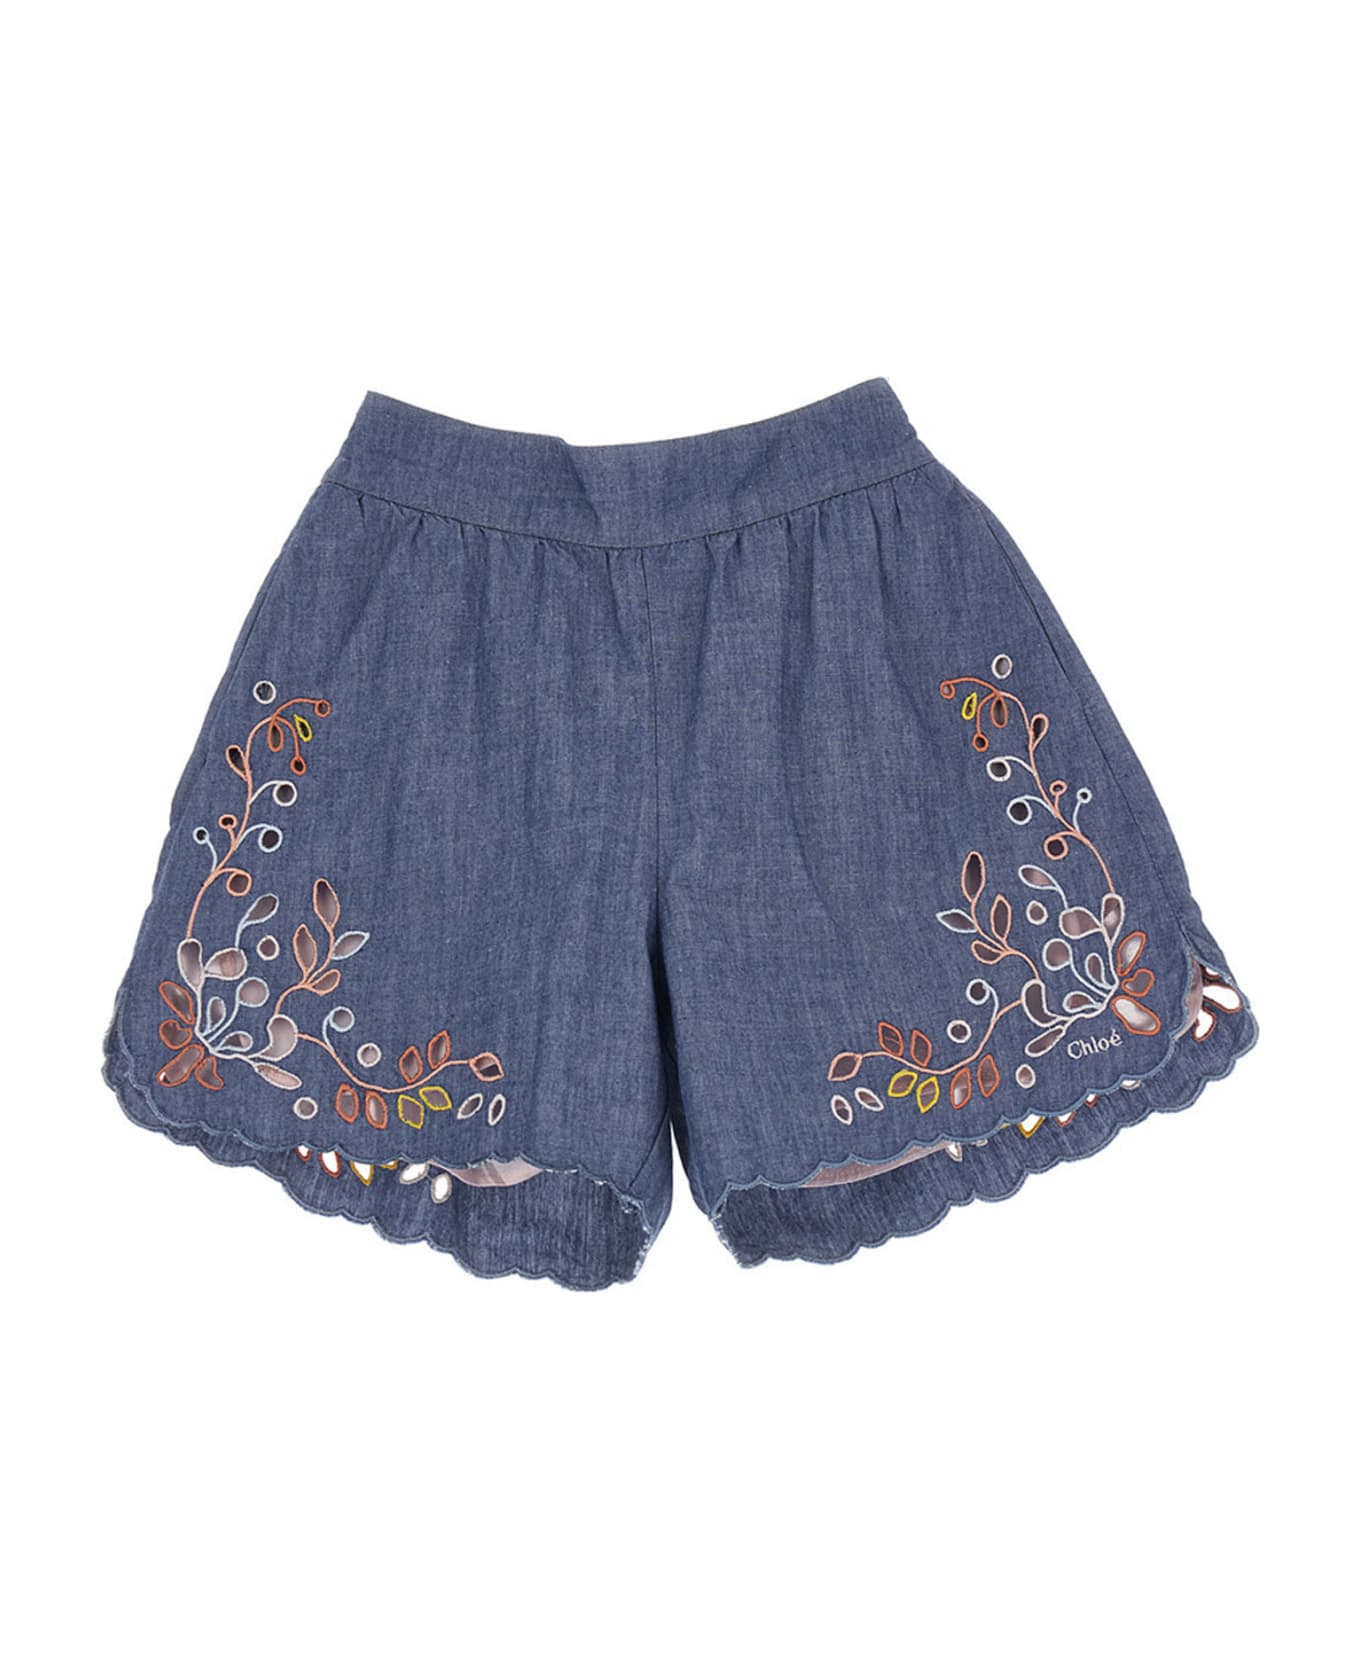 Chloé Embroidery Chamb Ray Shorts - Light Blue ボトムス